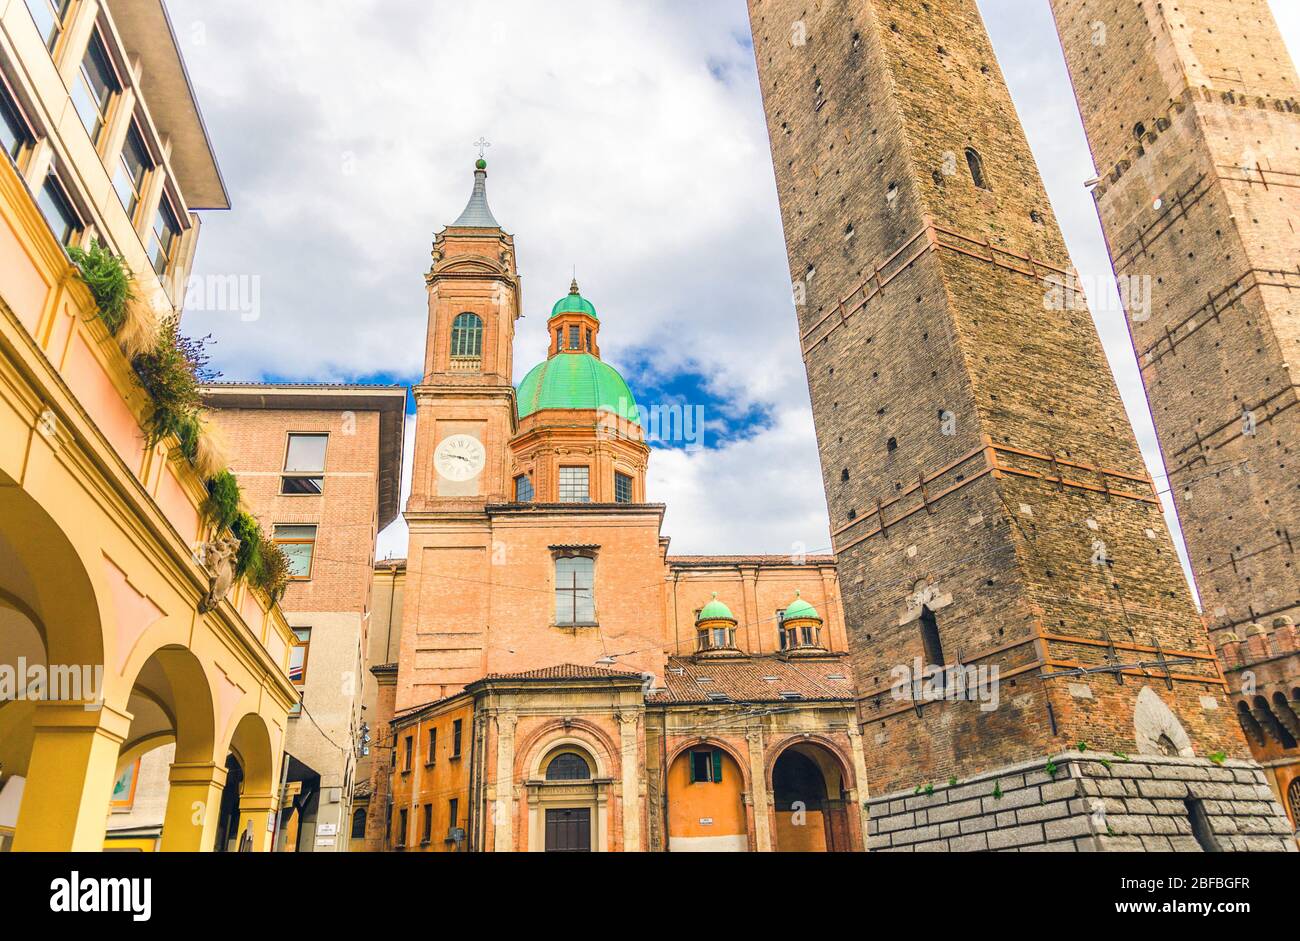 Chiesa Di San Gaetano High Resolution Stock Photography and Images - Alamy